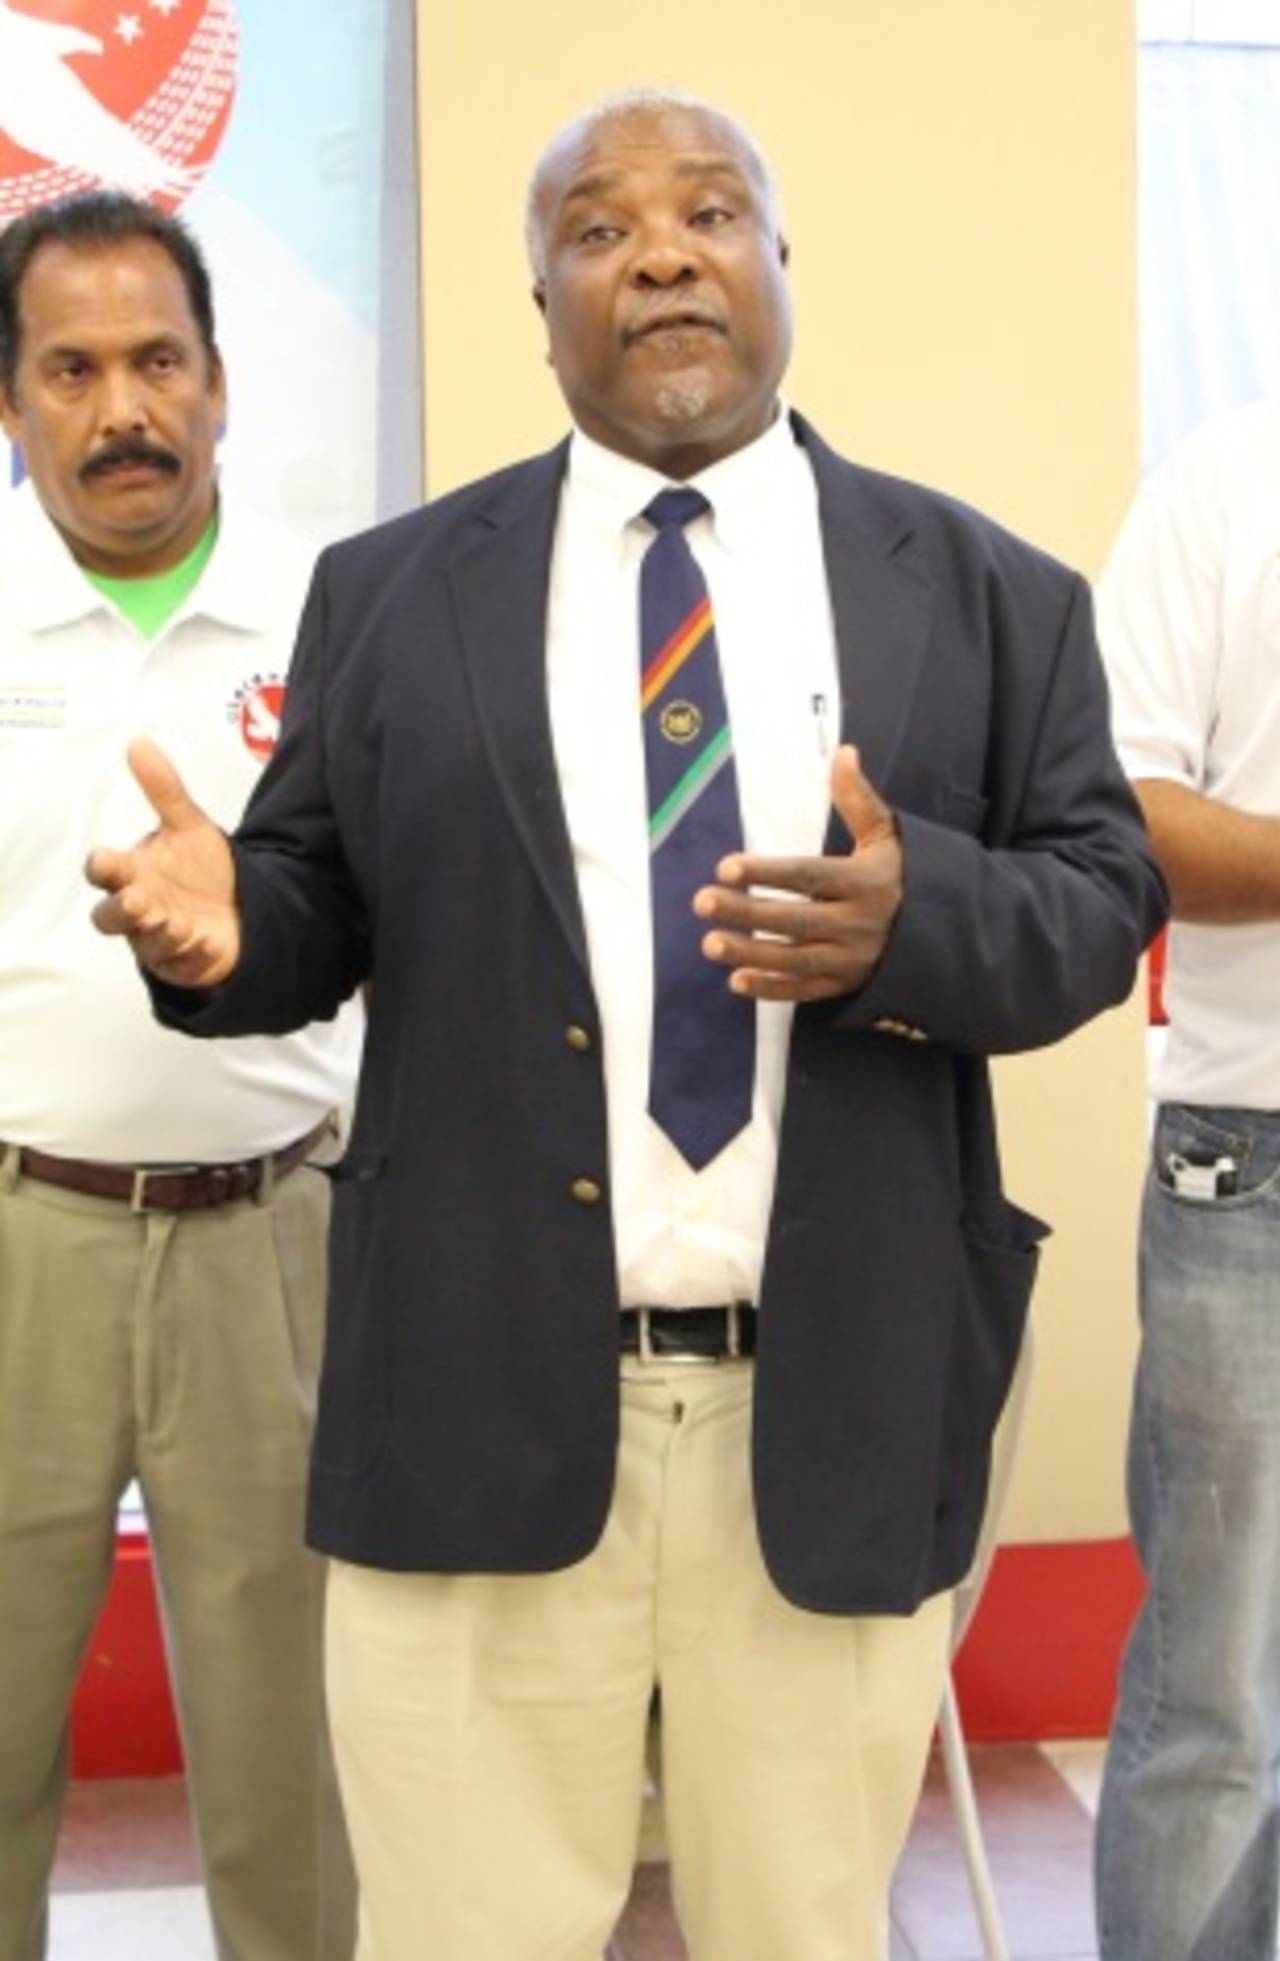 Gladstone Dainty speaks at the USACA T20 National Championship, USACA T20 National Championship, Lauderhill, August 16, 2014